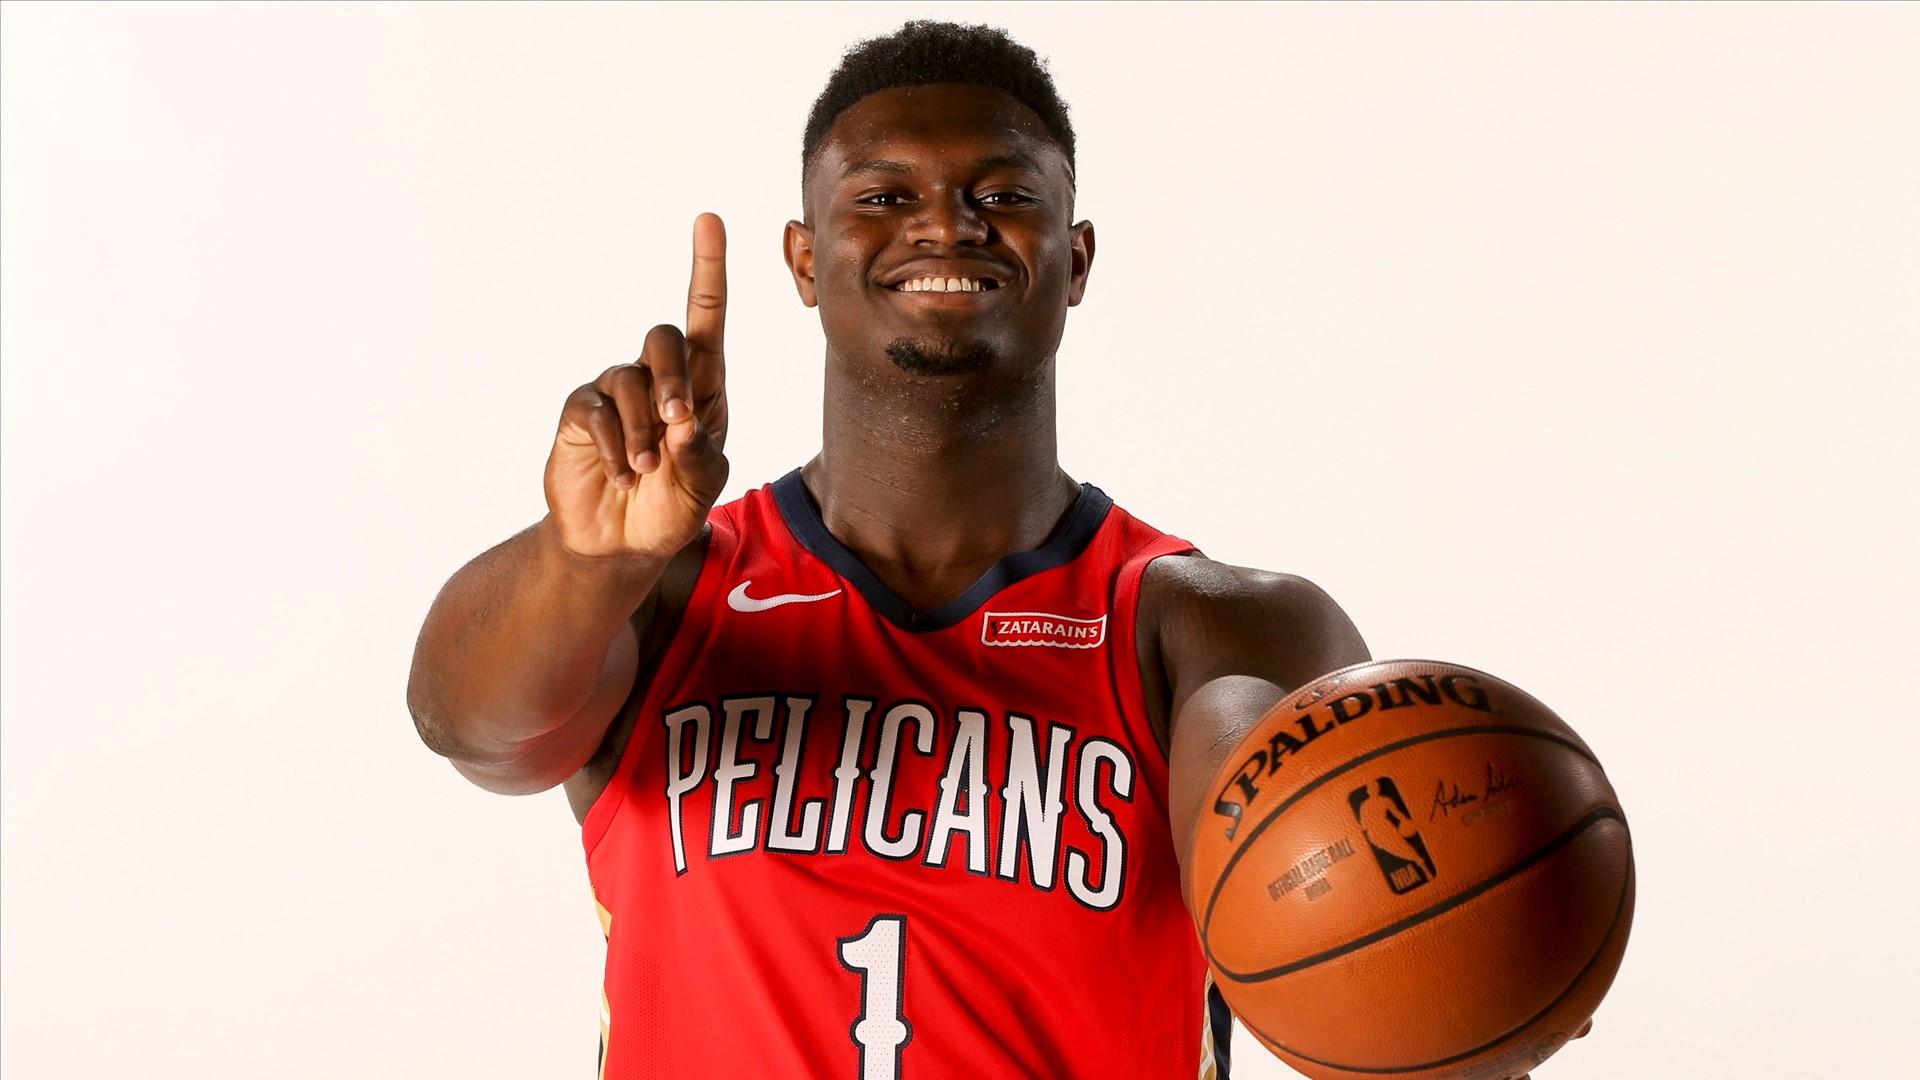 Pelicans rookie Zion Williamson wants to play for